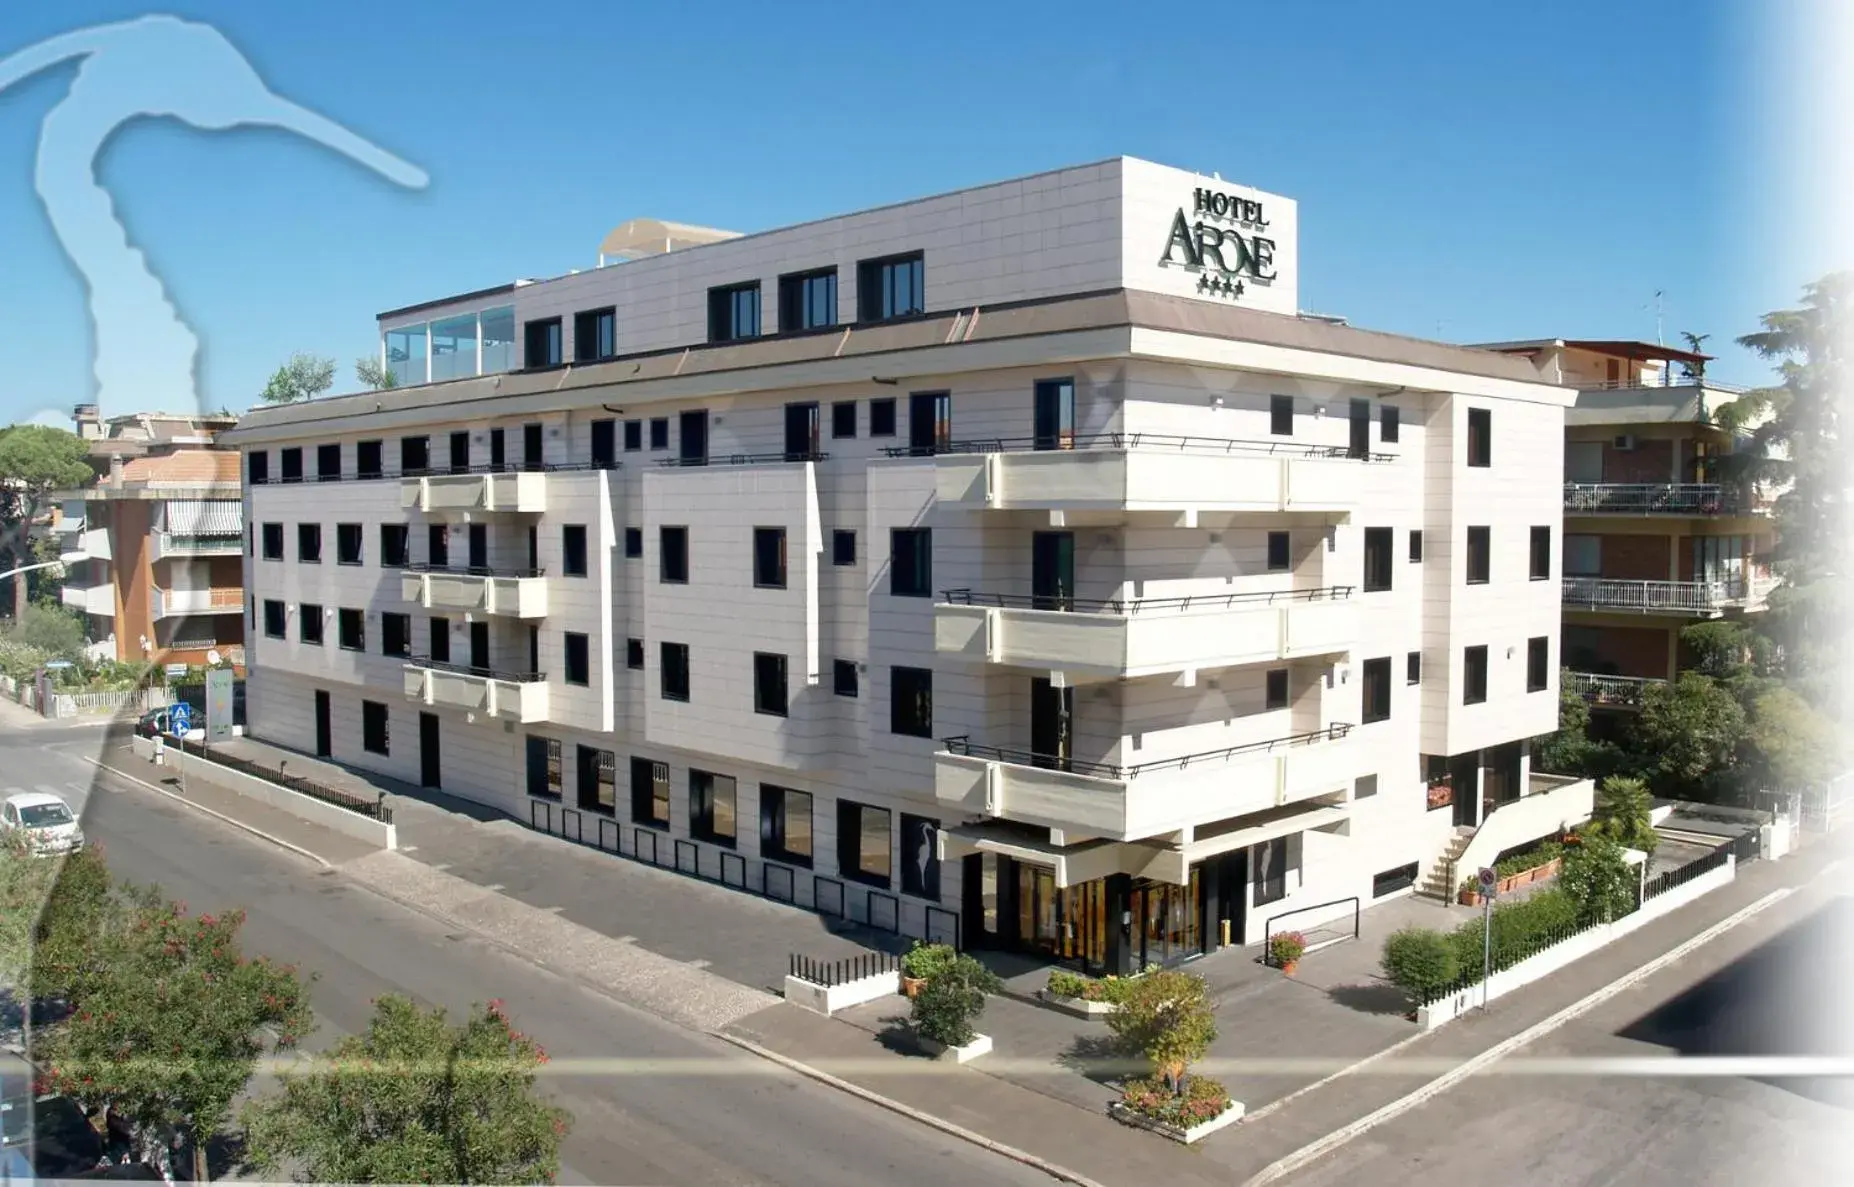 Property Building in Hotel Airone